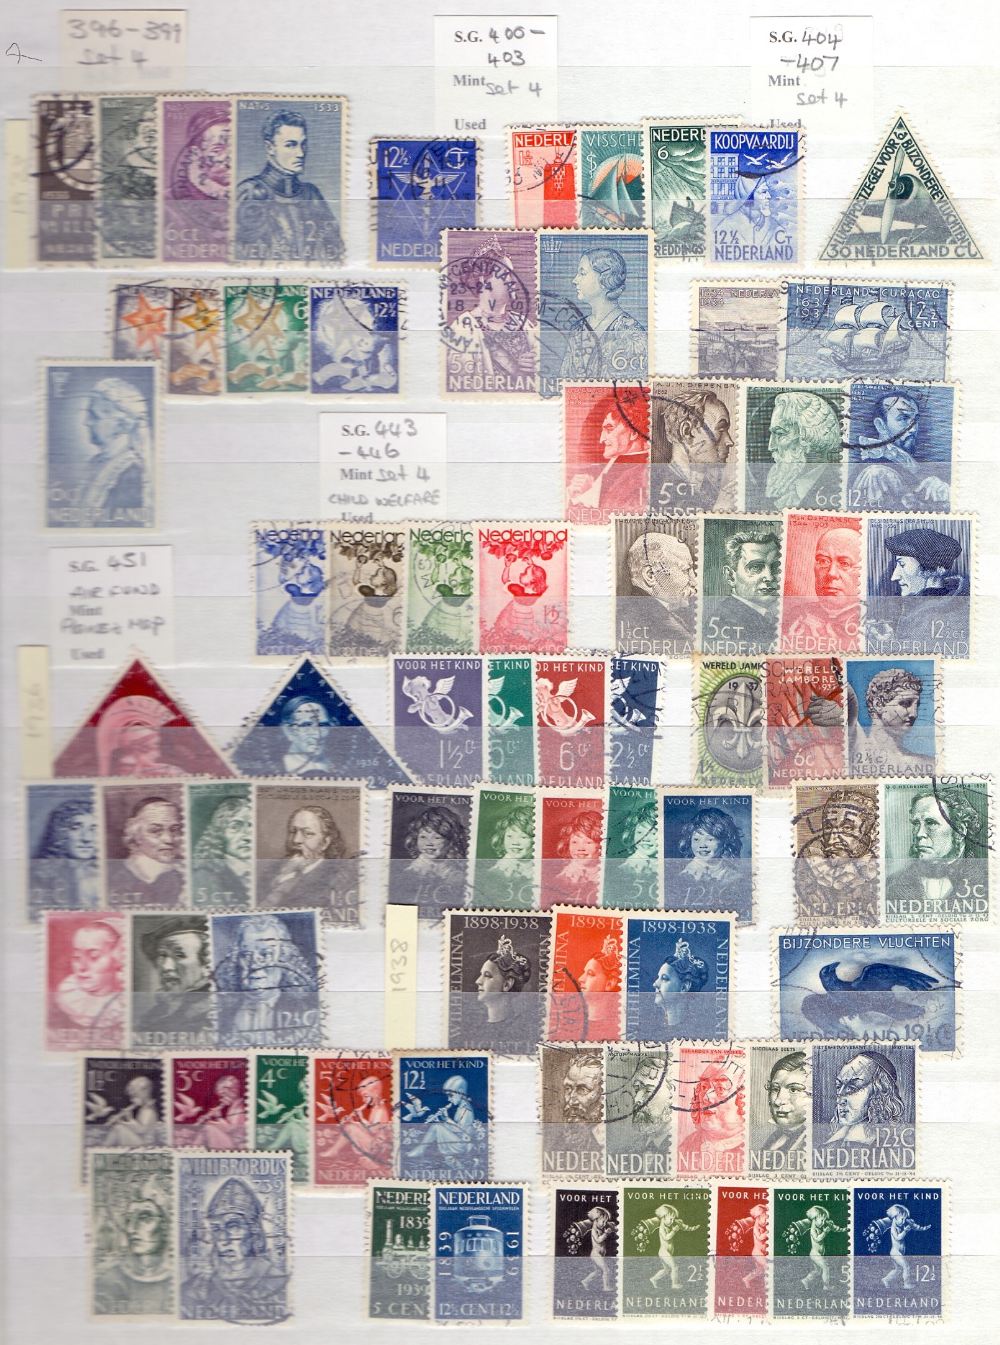 NETHERLANDS STAMPS : Stockbook with mint & used. Many 100s of stamps with sets & better values. - Image 2 of 3